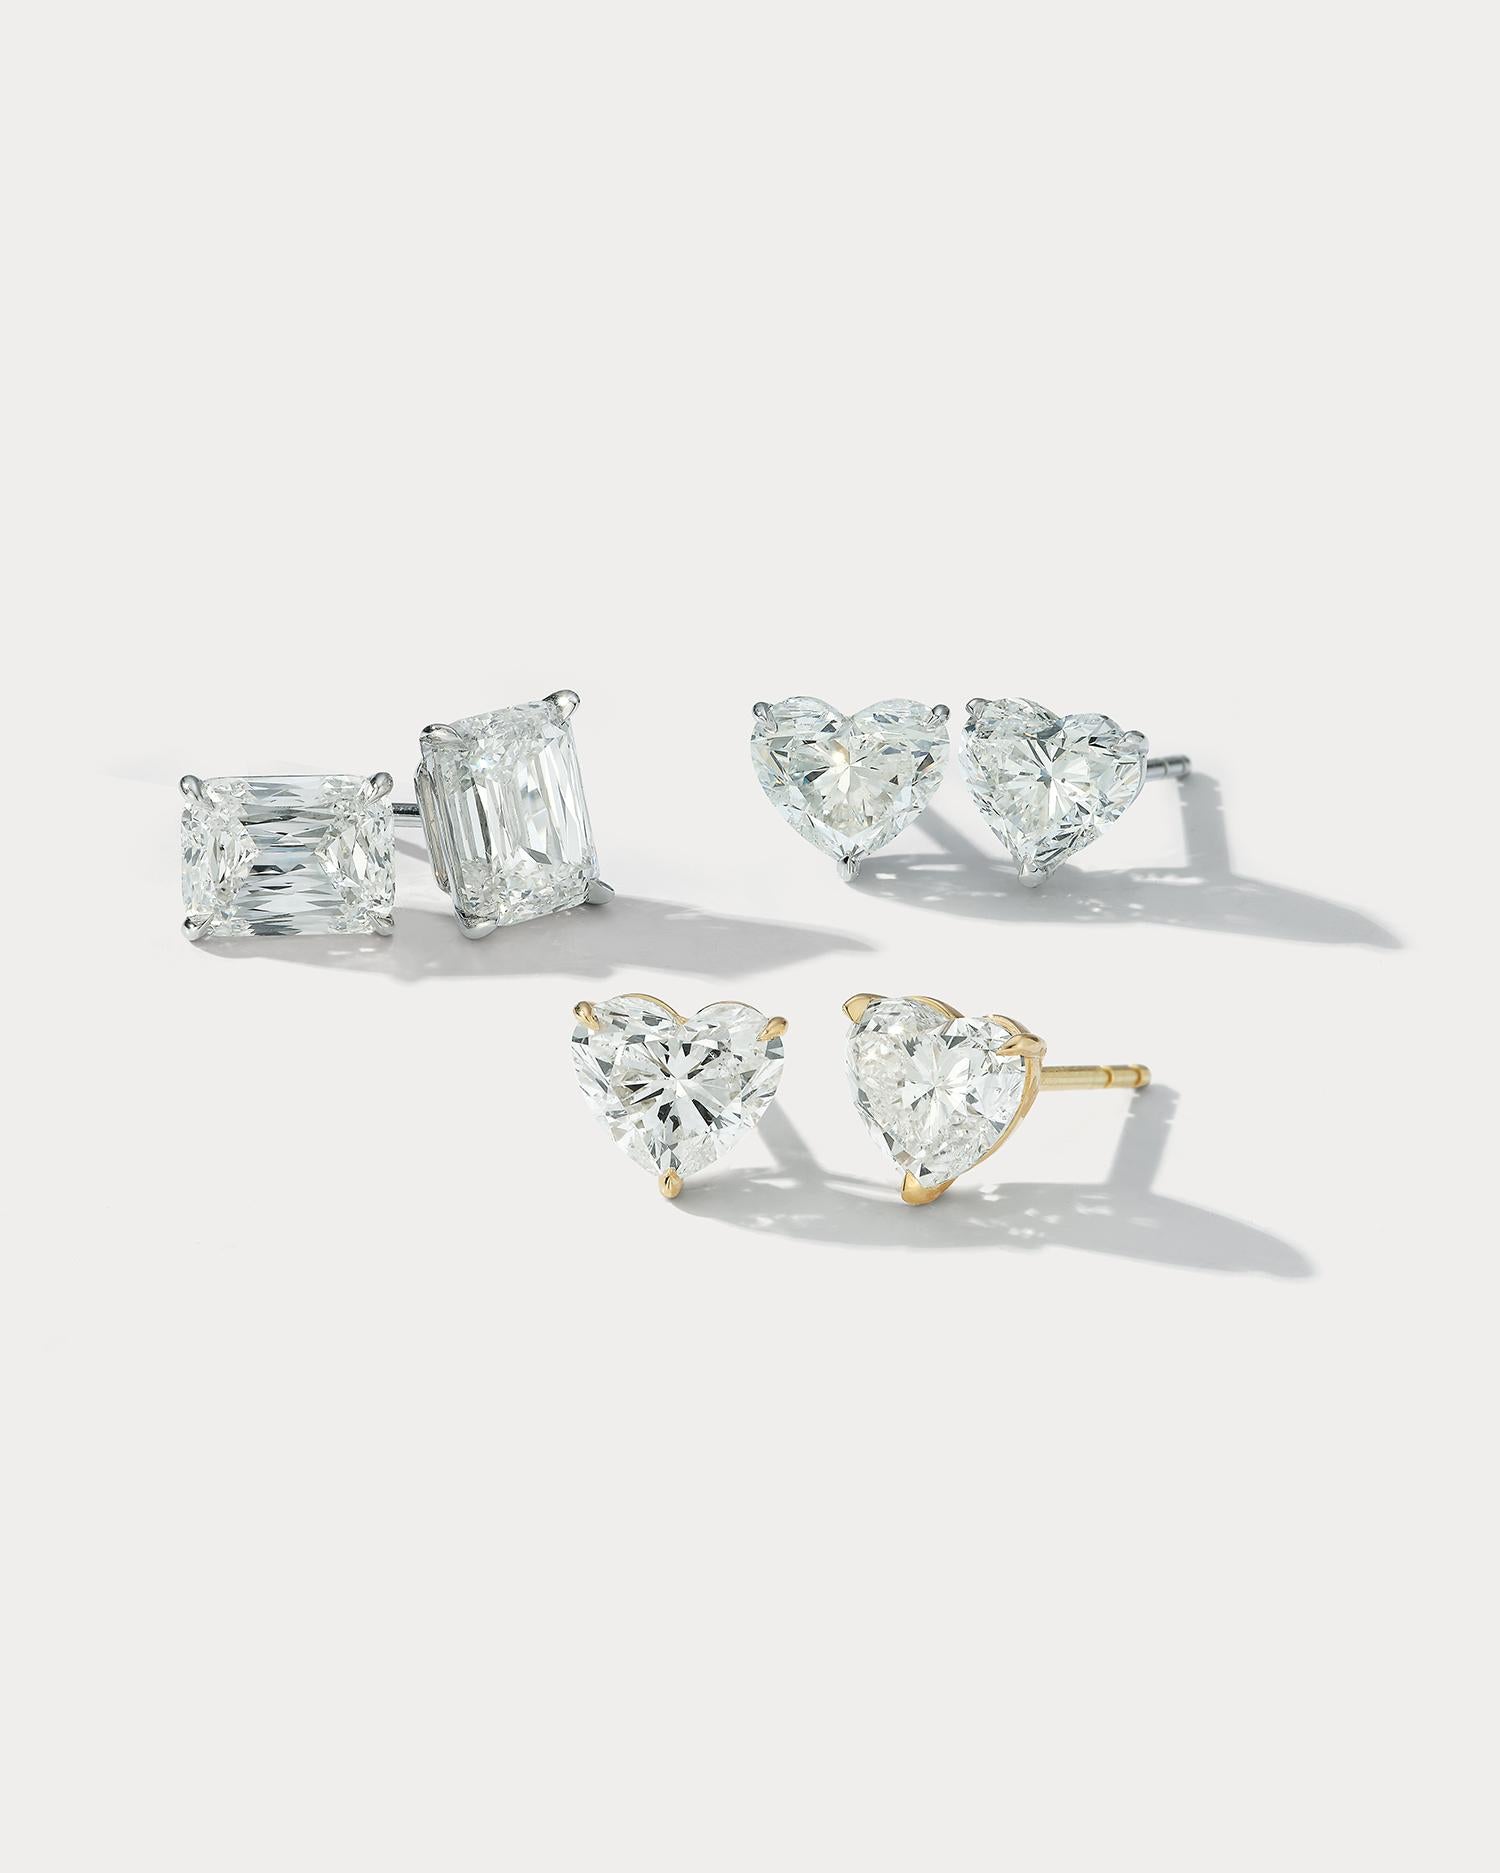 Fall in love with these stunning 4.21 carat total weight heart shaped diamond stud earrings, set in 18k yellow gold. The warm glow of the yellow gold perfectly complements the fire and brilliance of the heart shaped diamonds, creating a mesmerizing